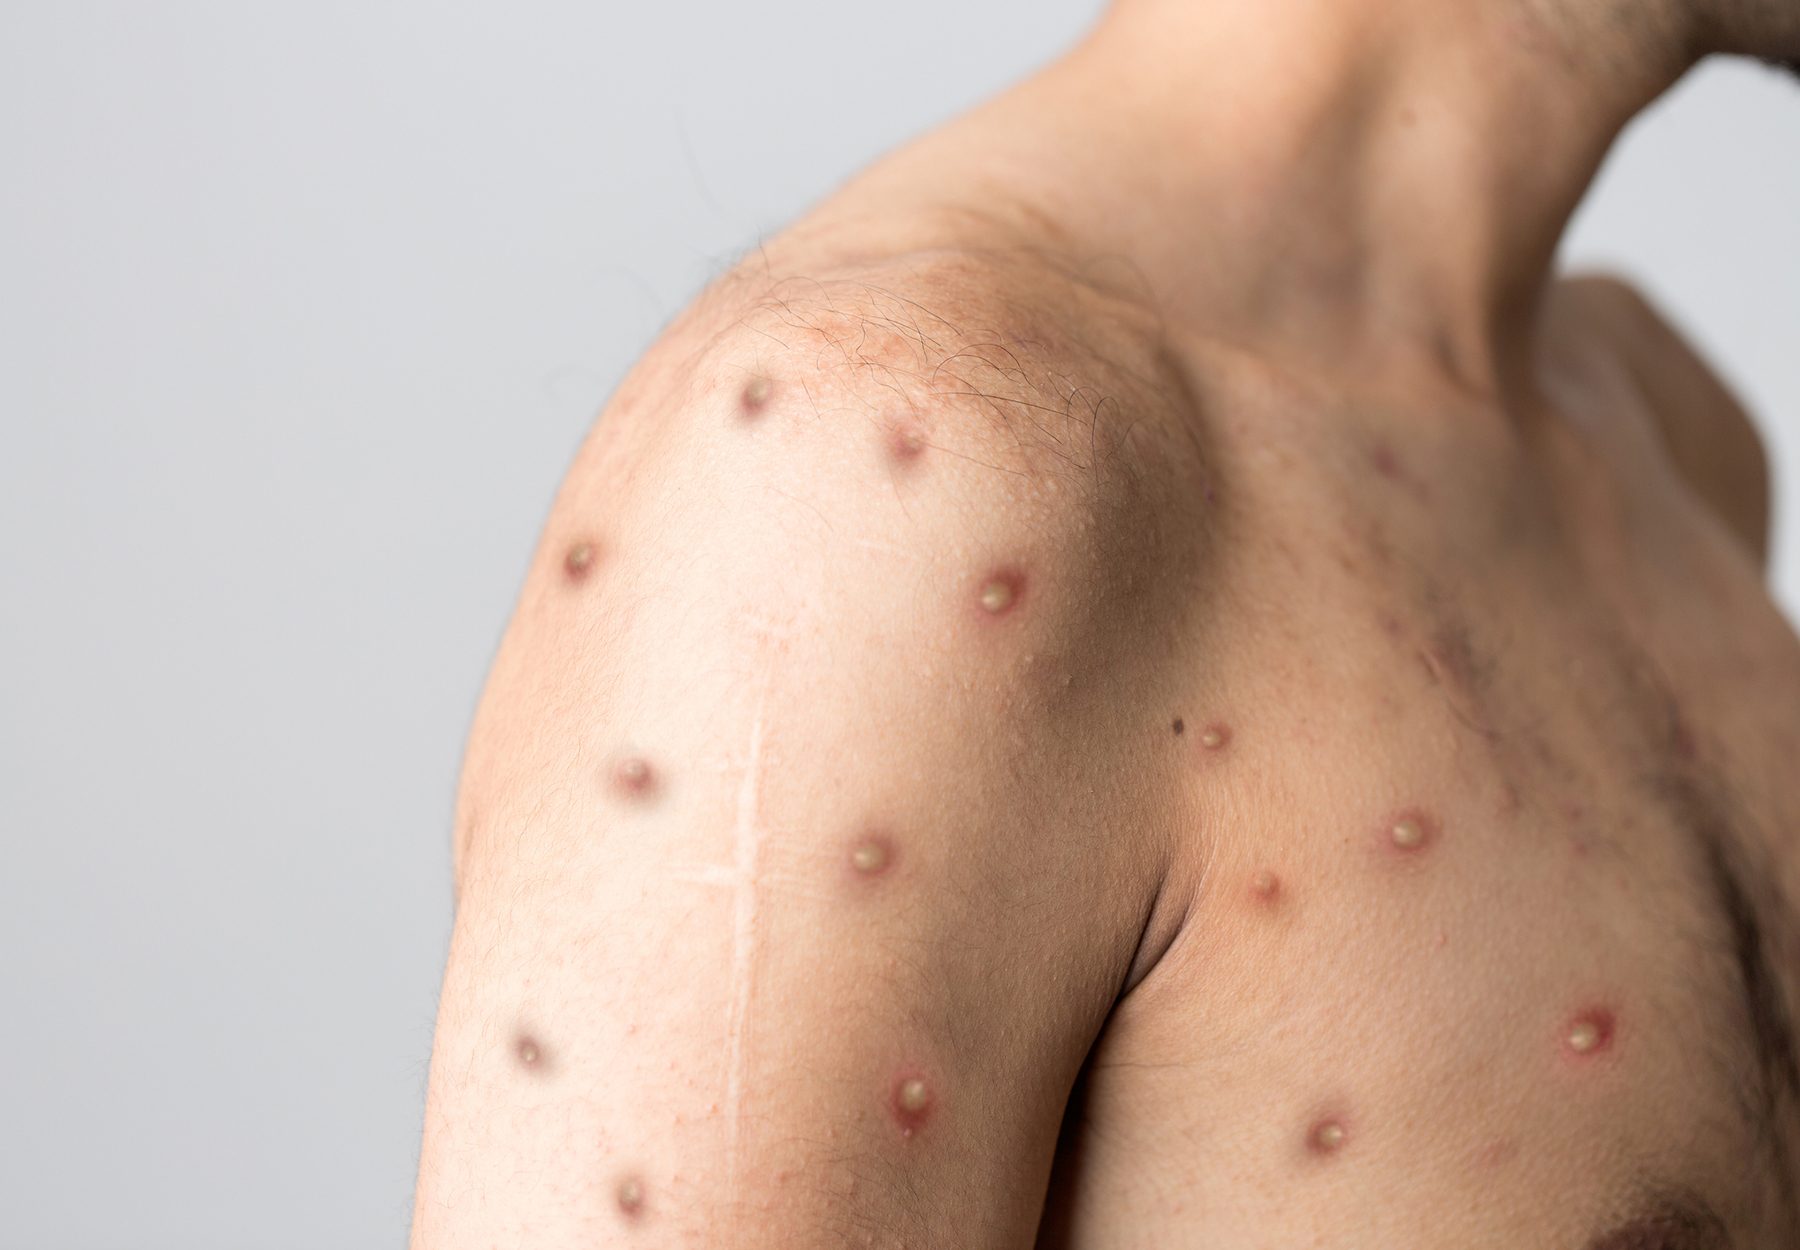 Closeup of man's shoulder and chest with monkeypox rash. Stock photo.